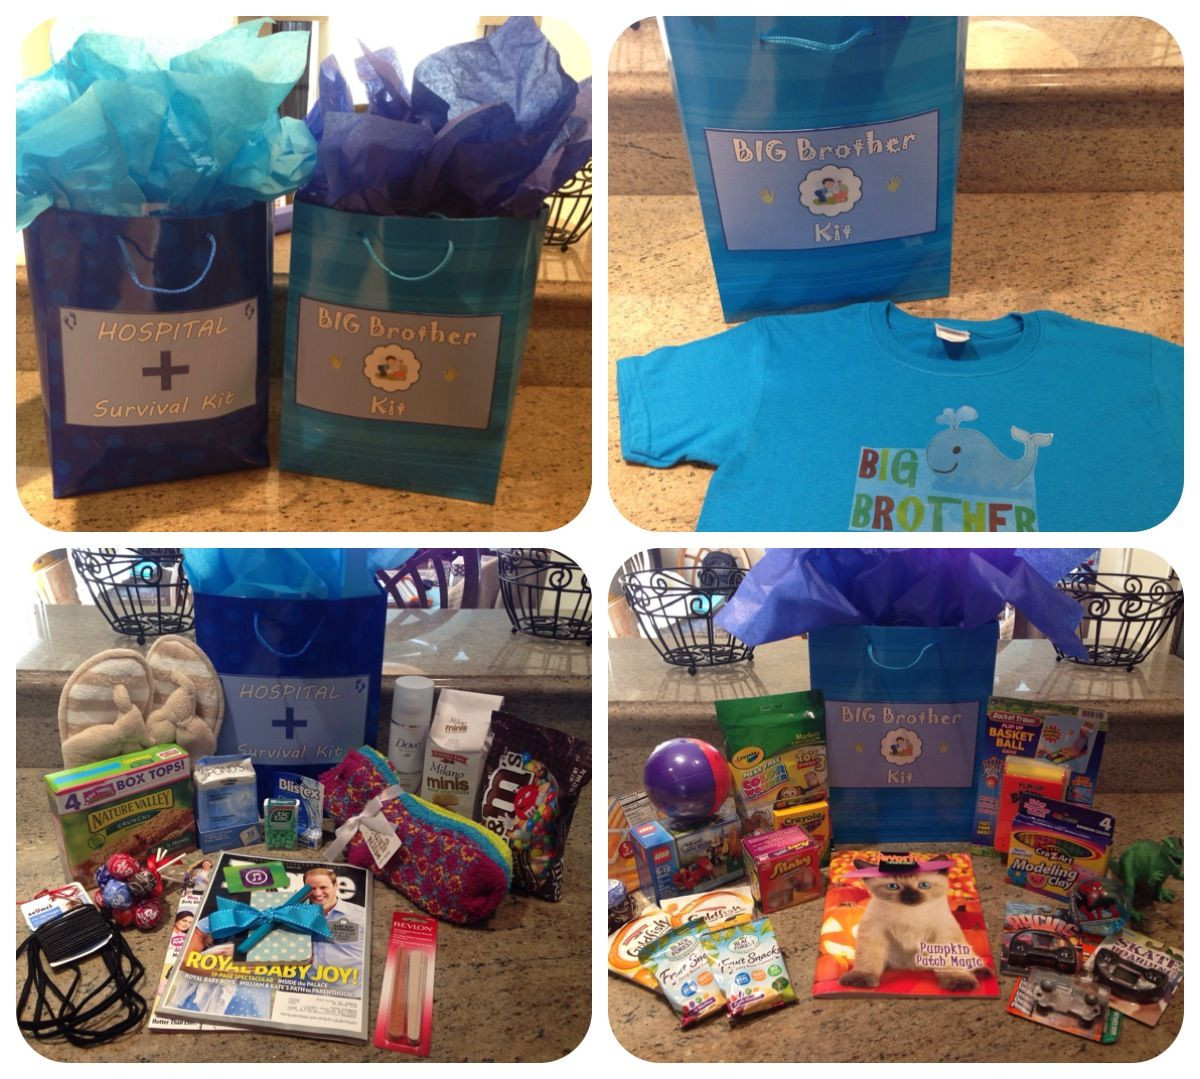 Big Brother Gift Ideas From Baby
 Hospital Survival Kit and Big Brother Kit for the big day